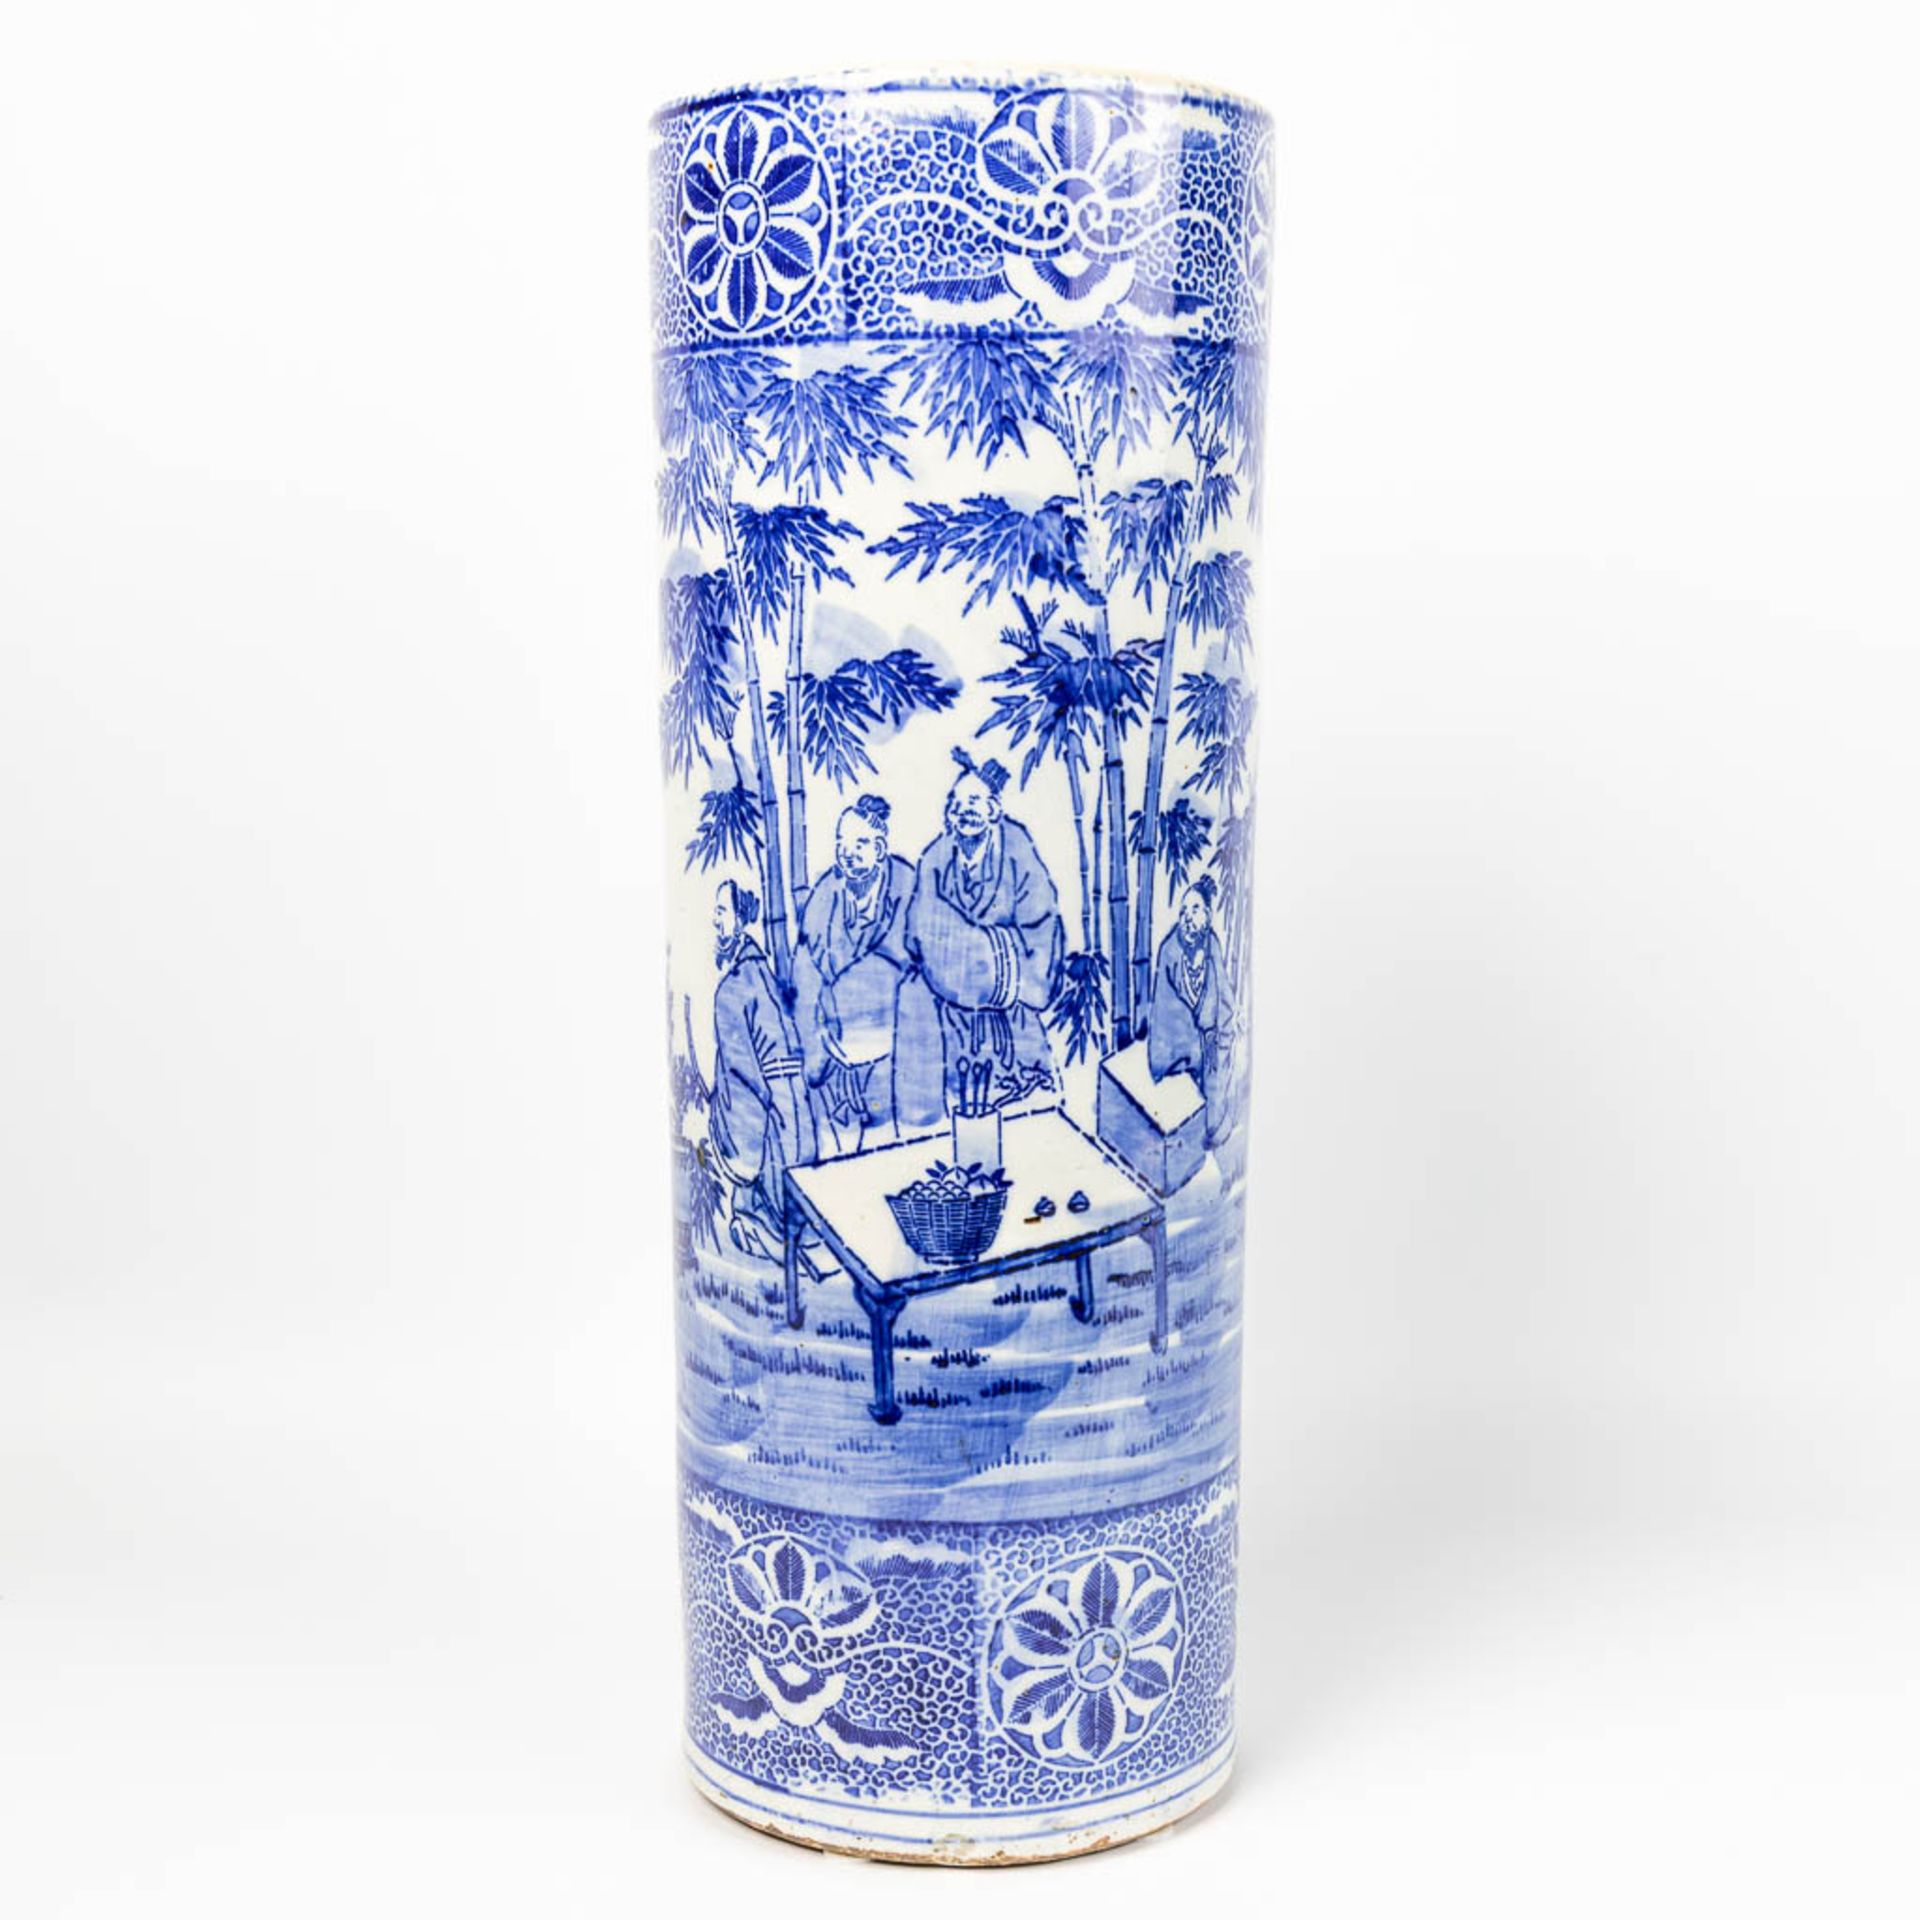 A vase made of Chinese Porcelain and decorated with a blue-white garden view.